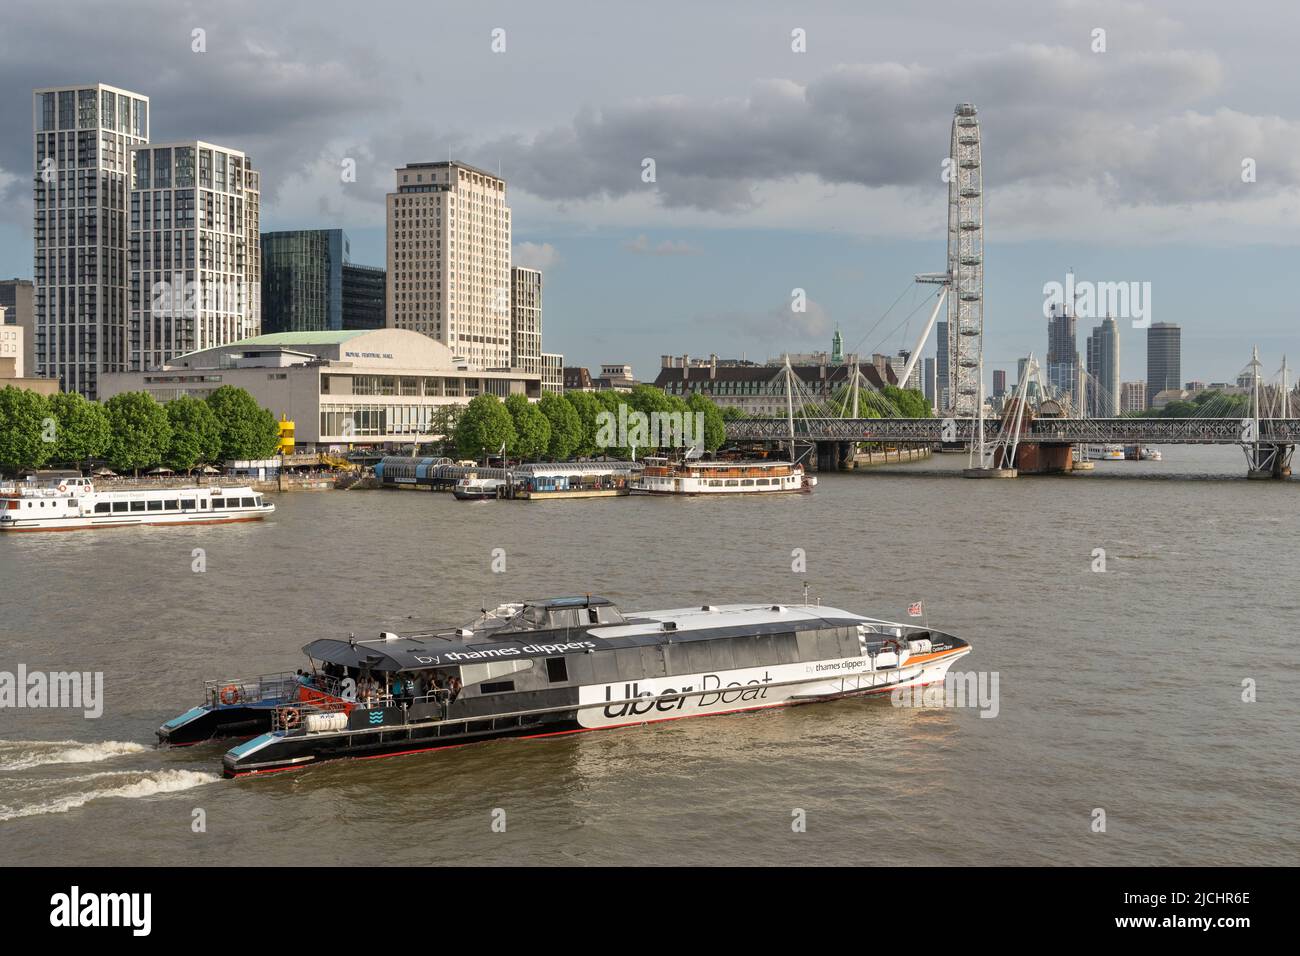 UBER boat by Thames Clippers, Southbank, London Stock Photo